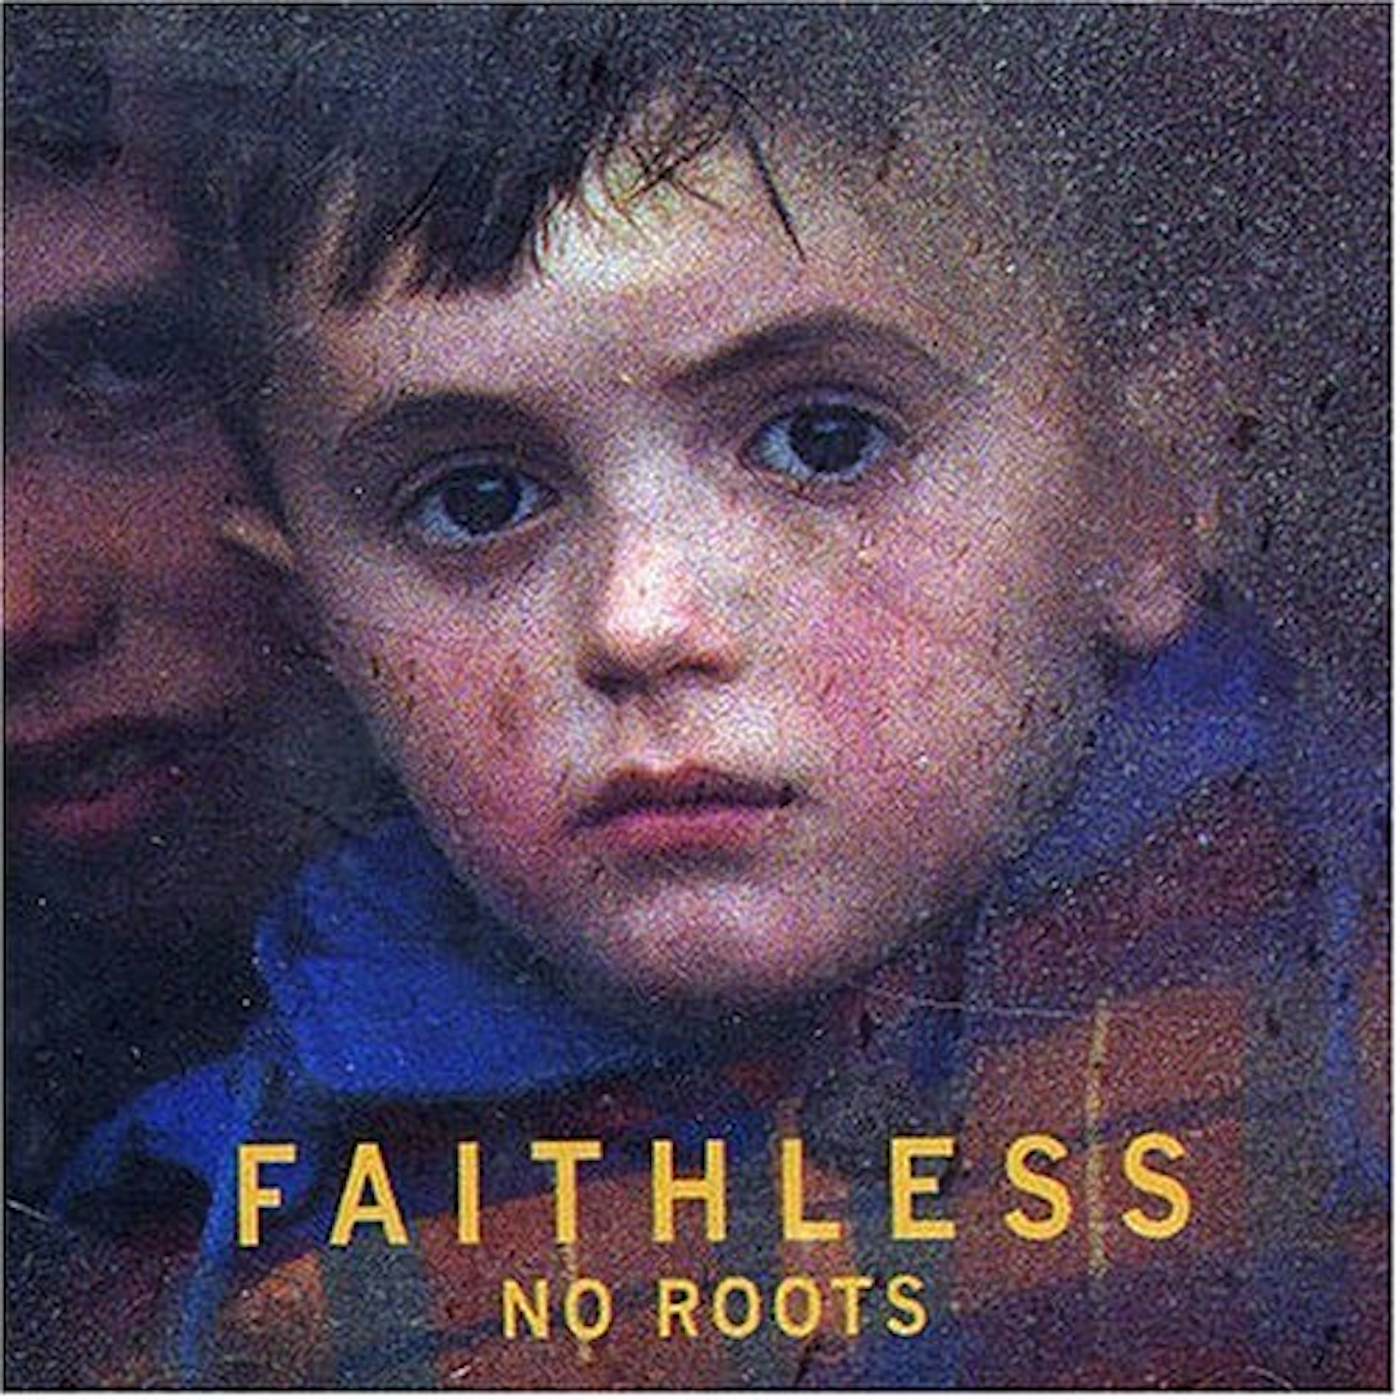 Faithless NO ROOTS CD